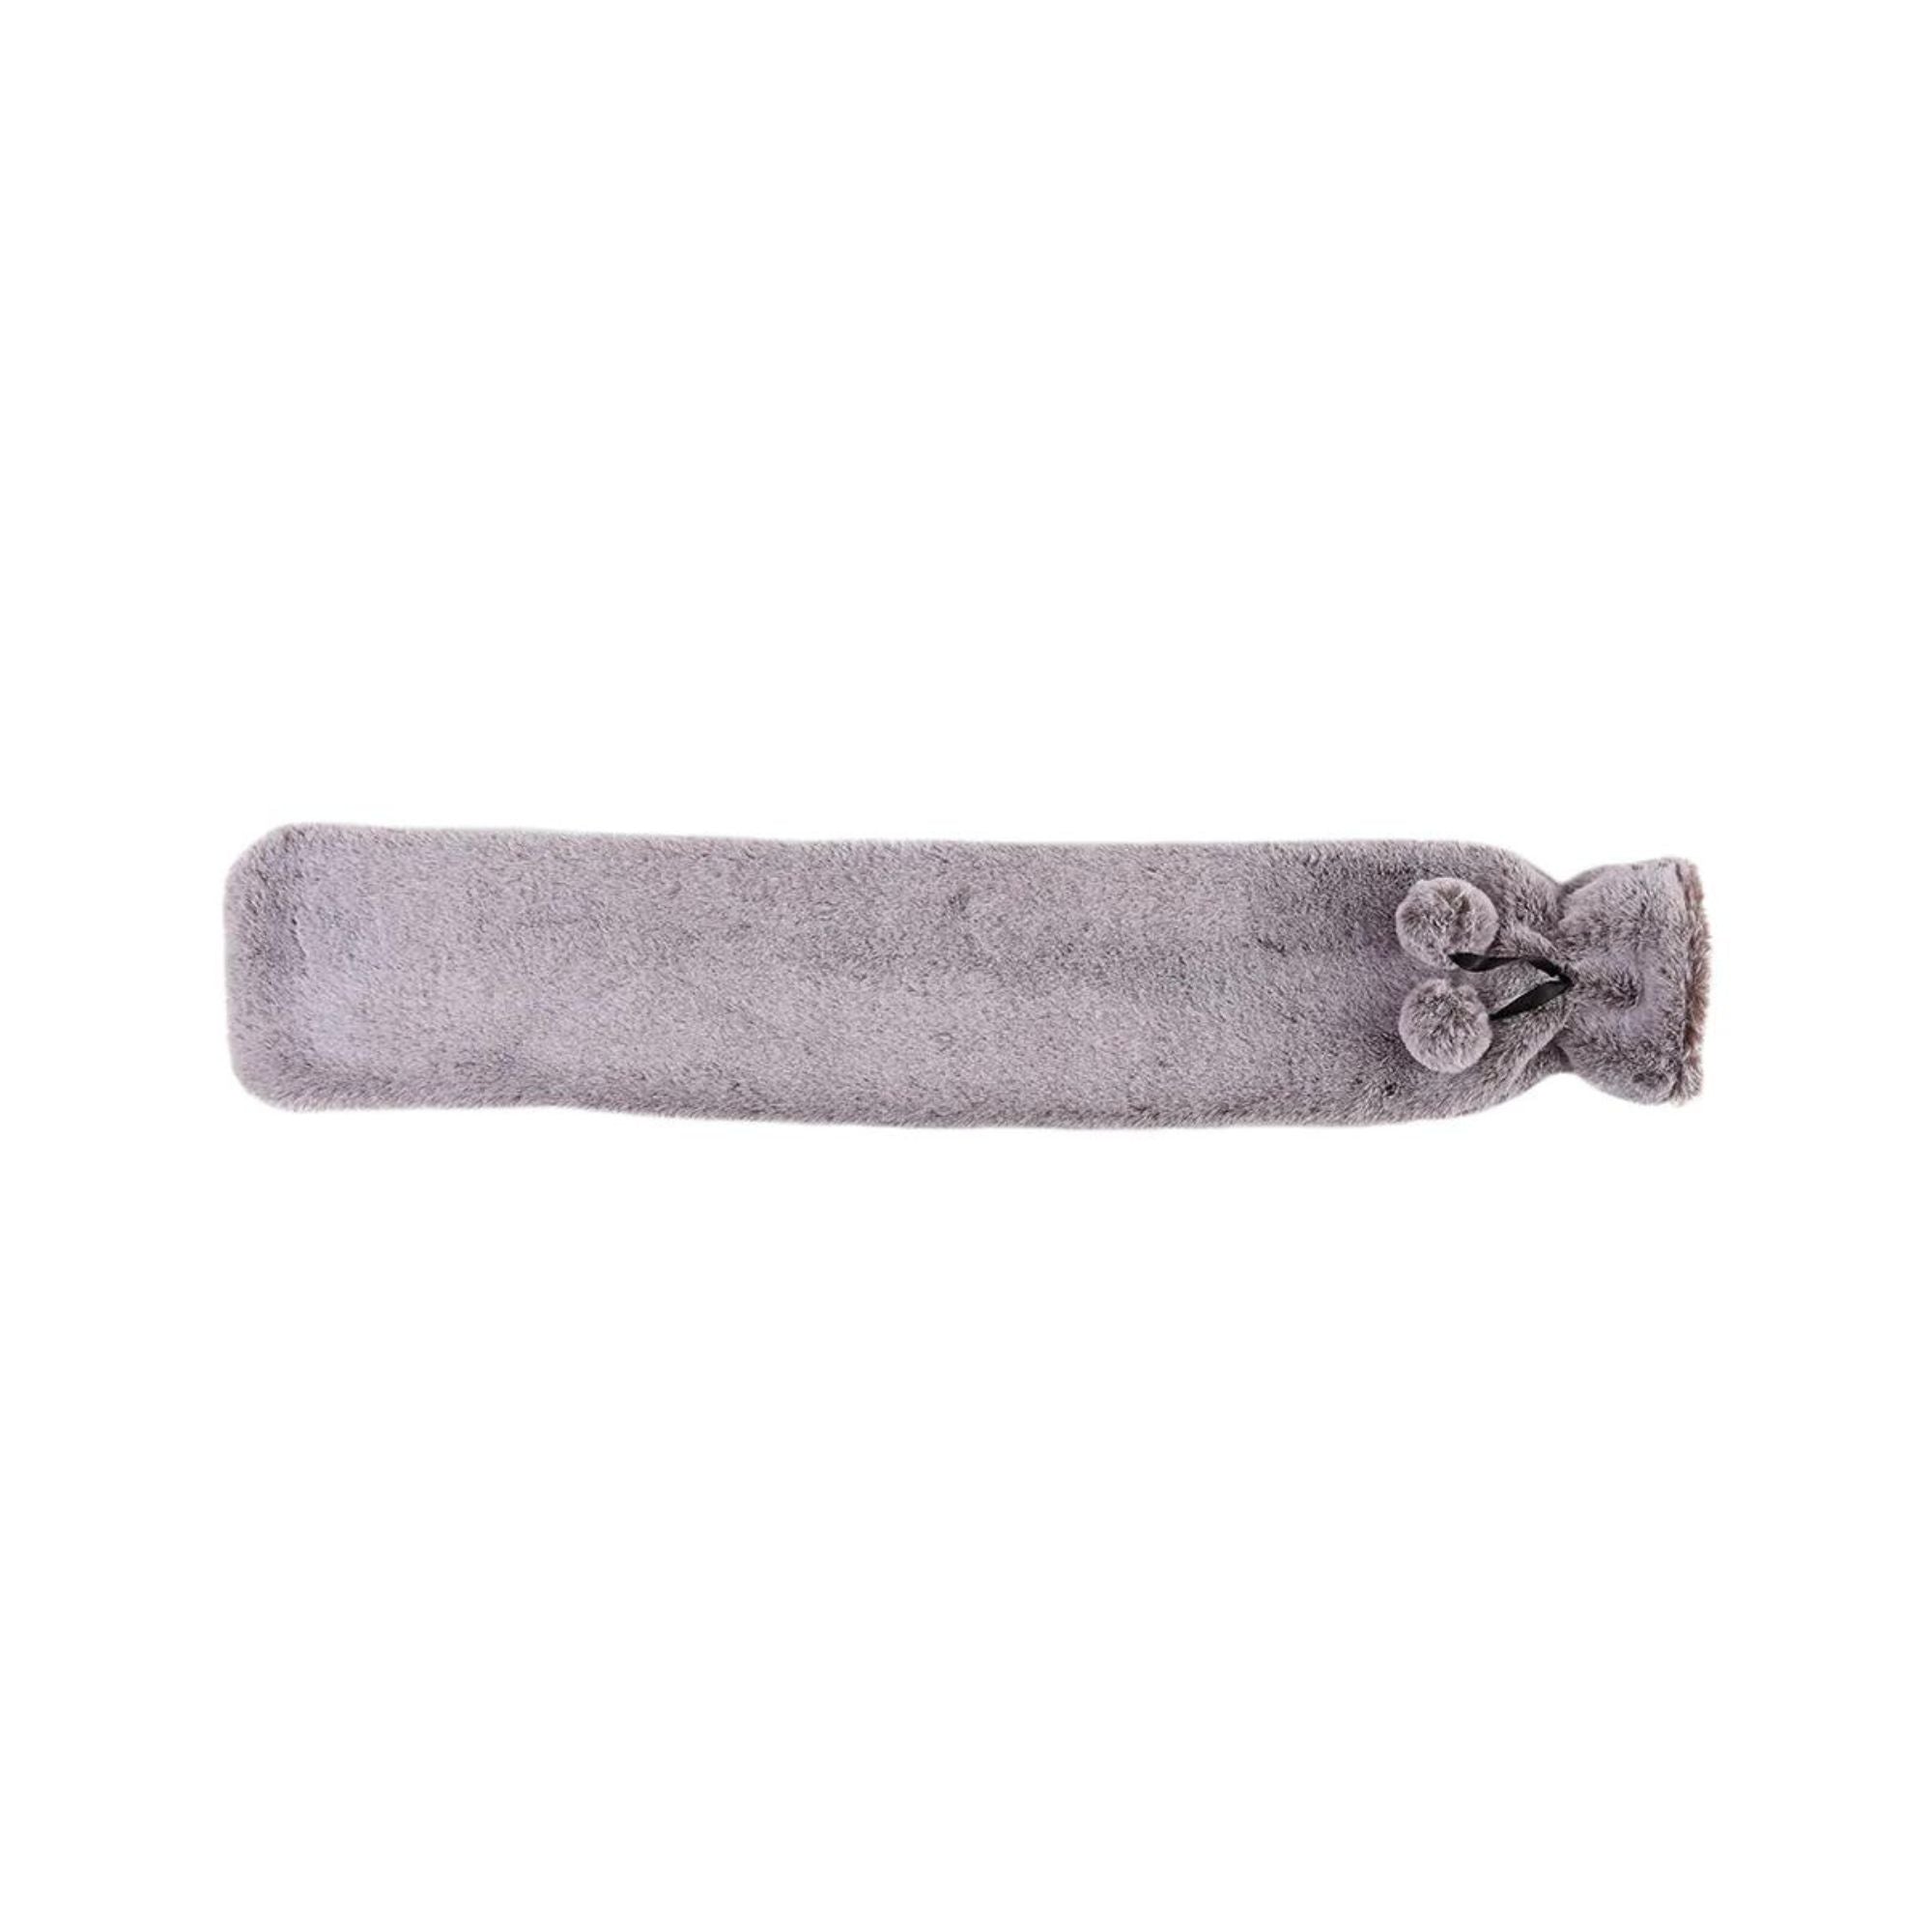 2 Litre Long Hot Water Bottle with Marshmallow Grey Faux Fur Cover